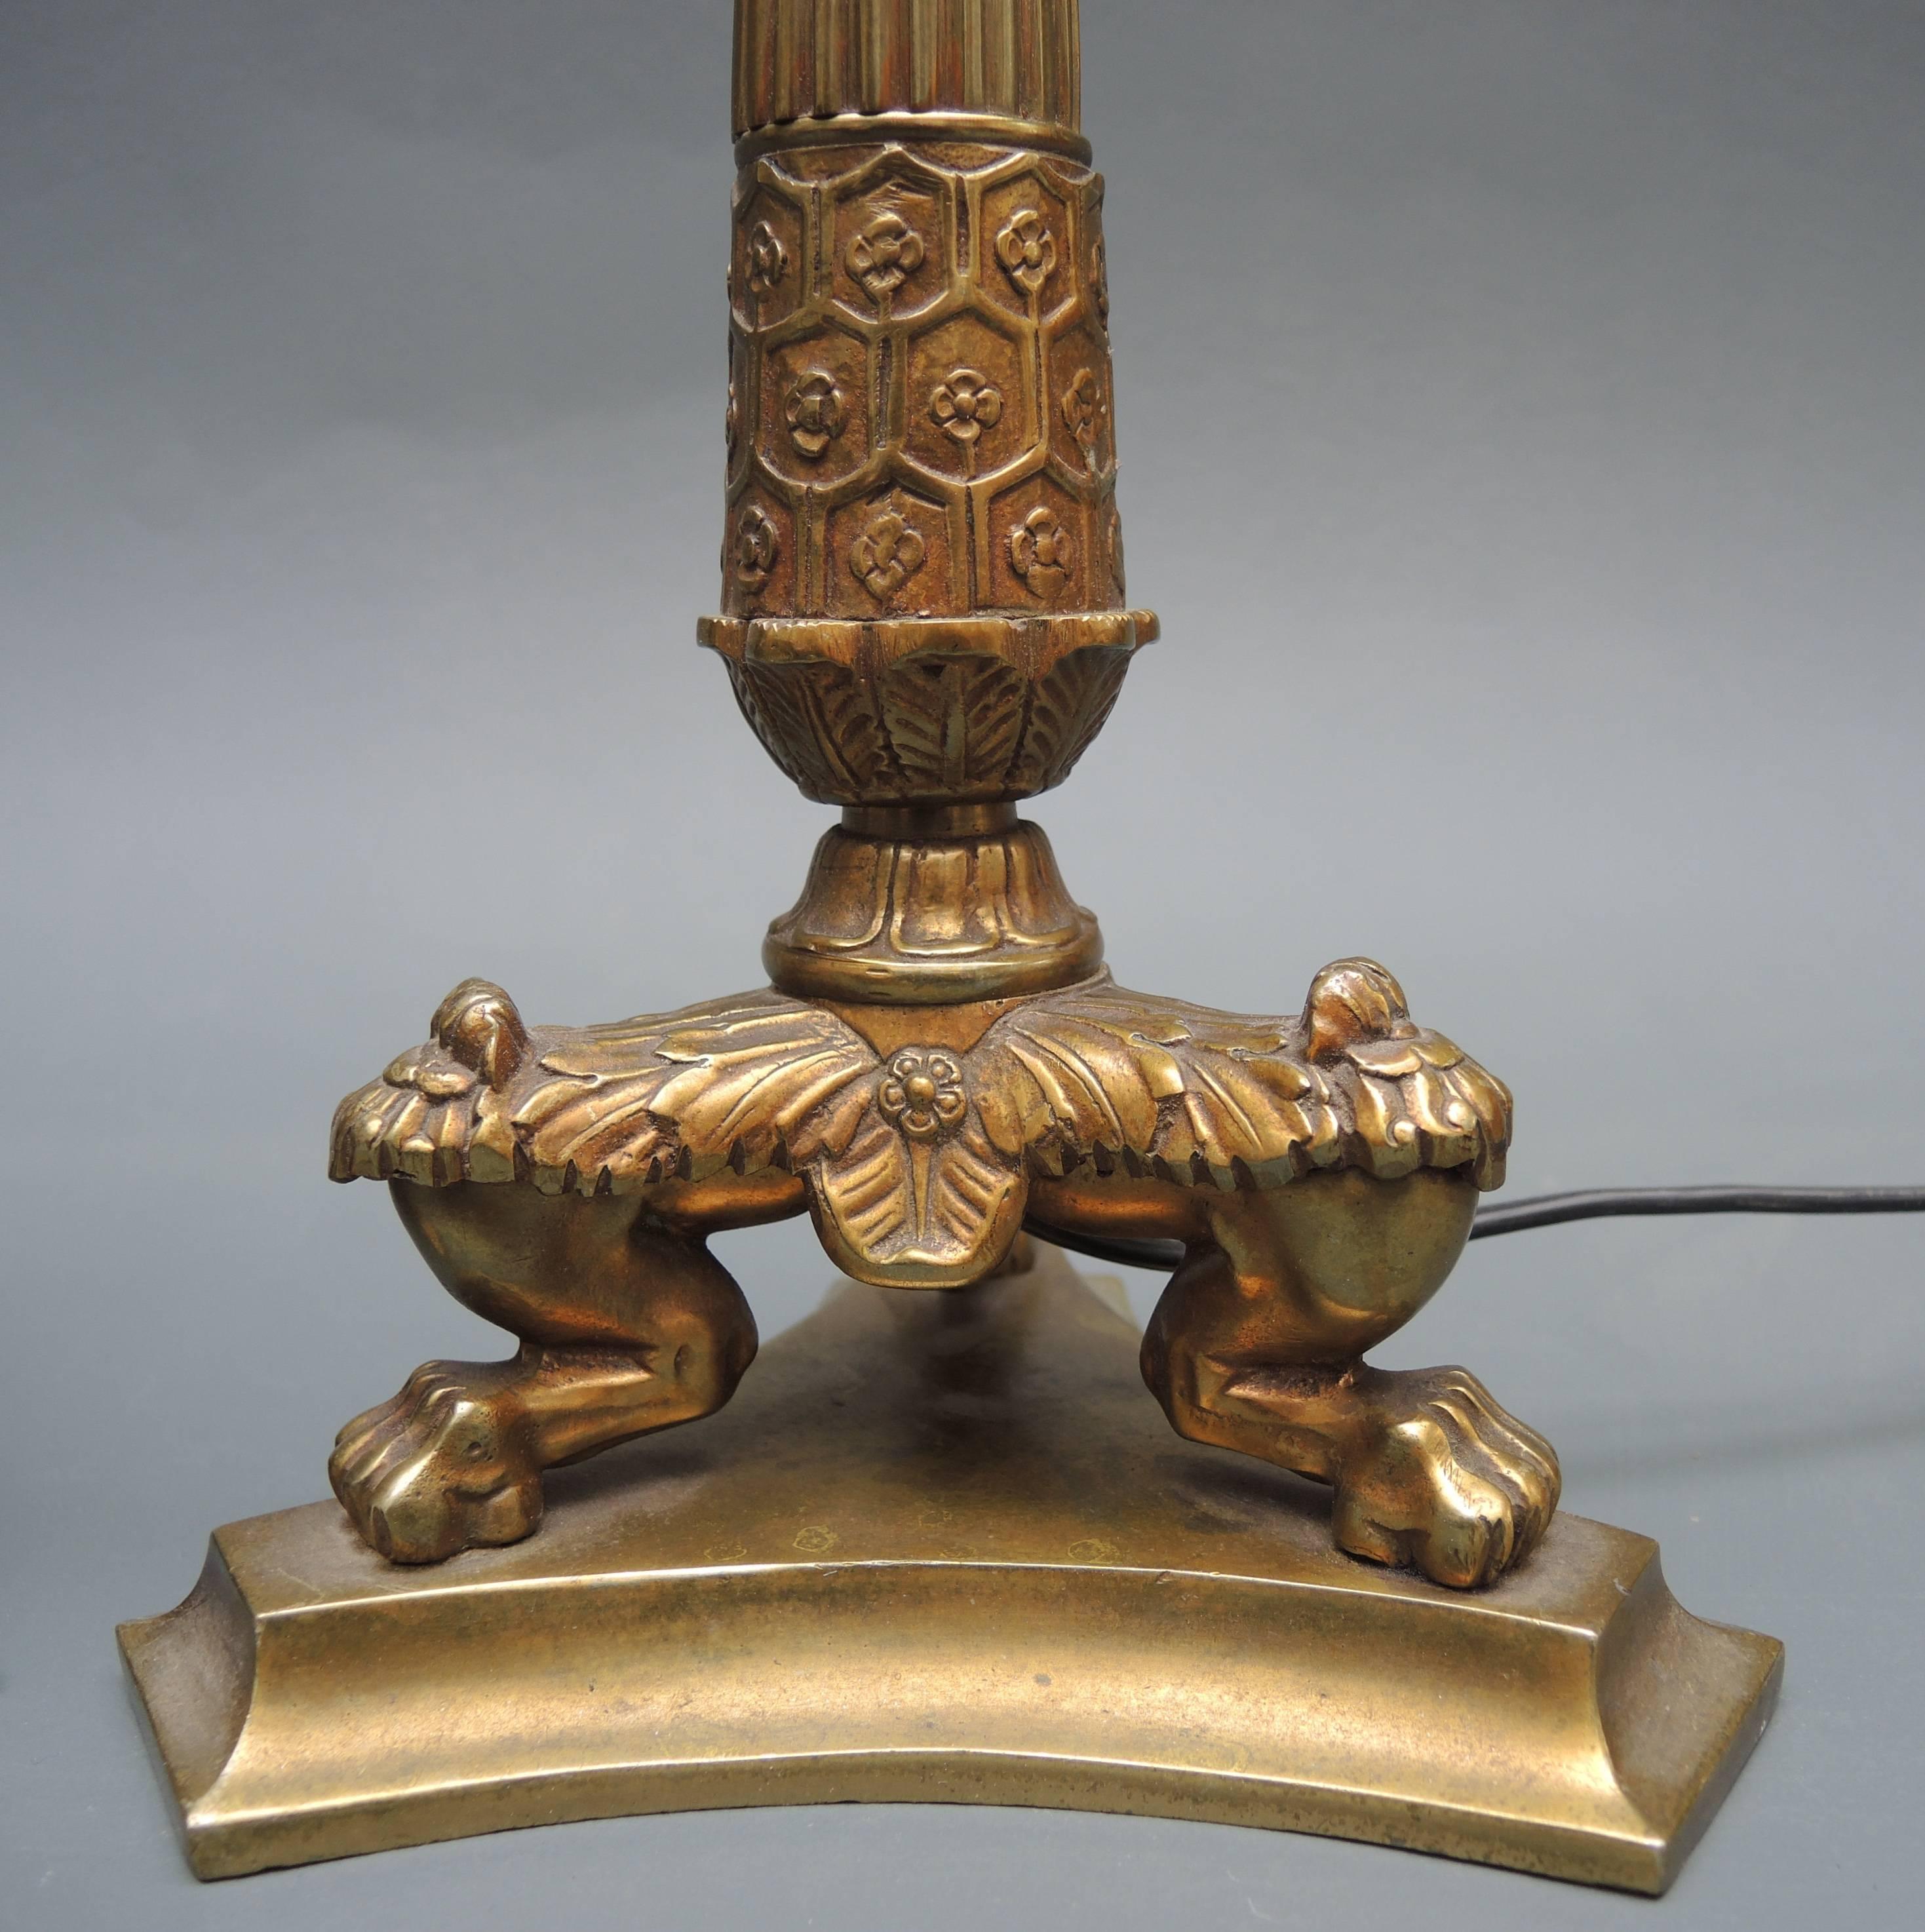 A pair of solid cast bronze French Empire style candlestick lamps circa 1960. The fine detailed casting gives these lamps an elegant but strong impression on a desk or console table, (especially when simple black shades are used.)